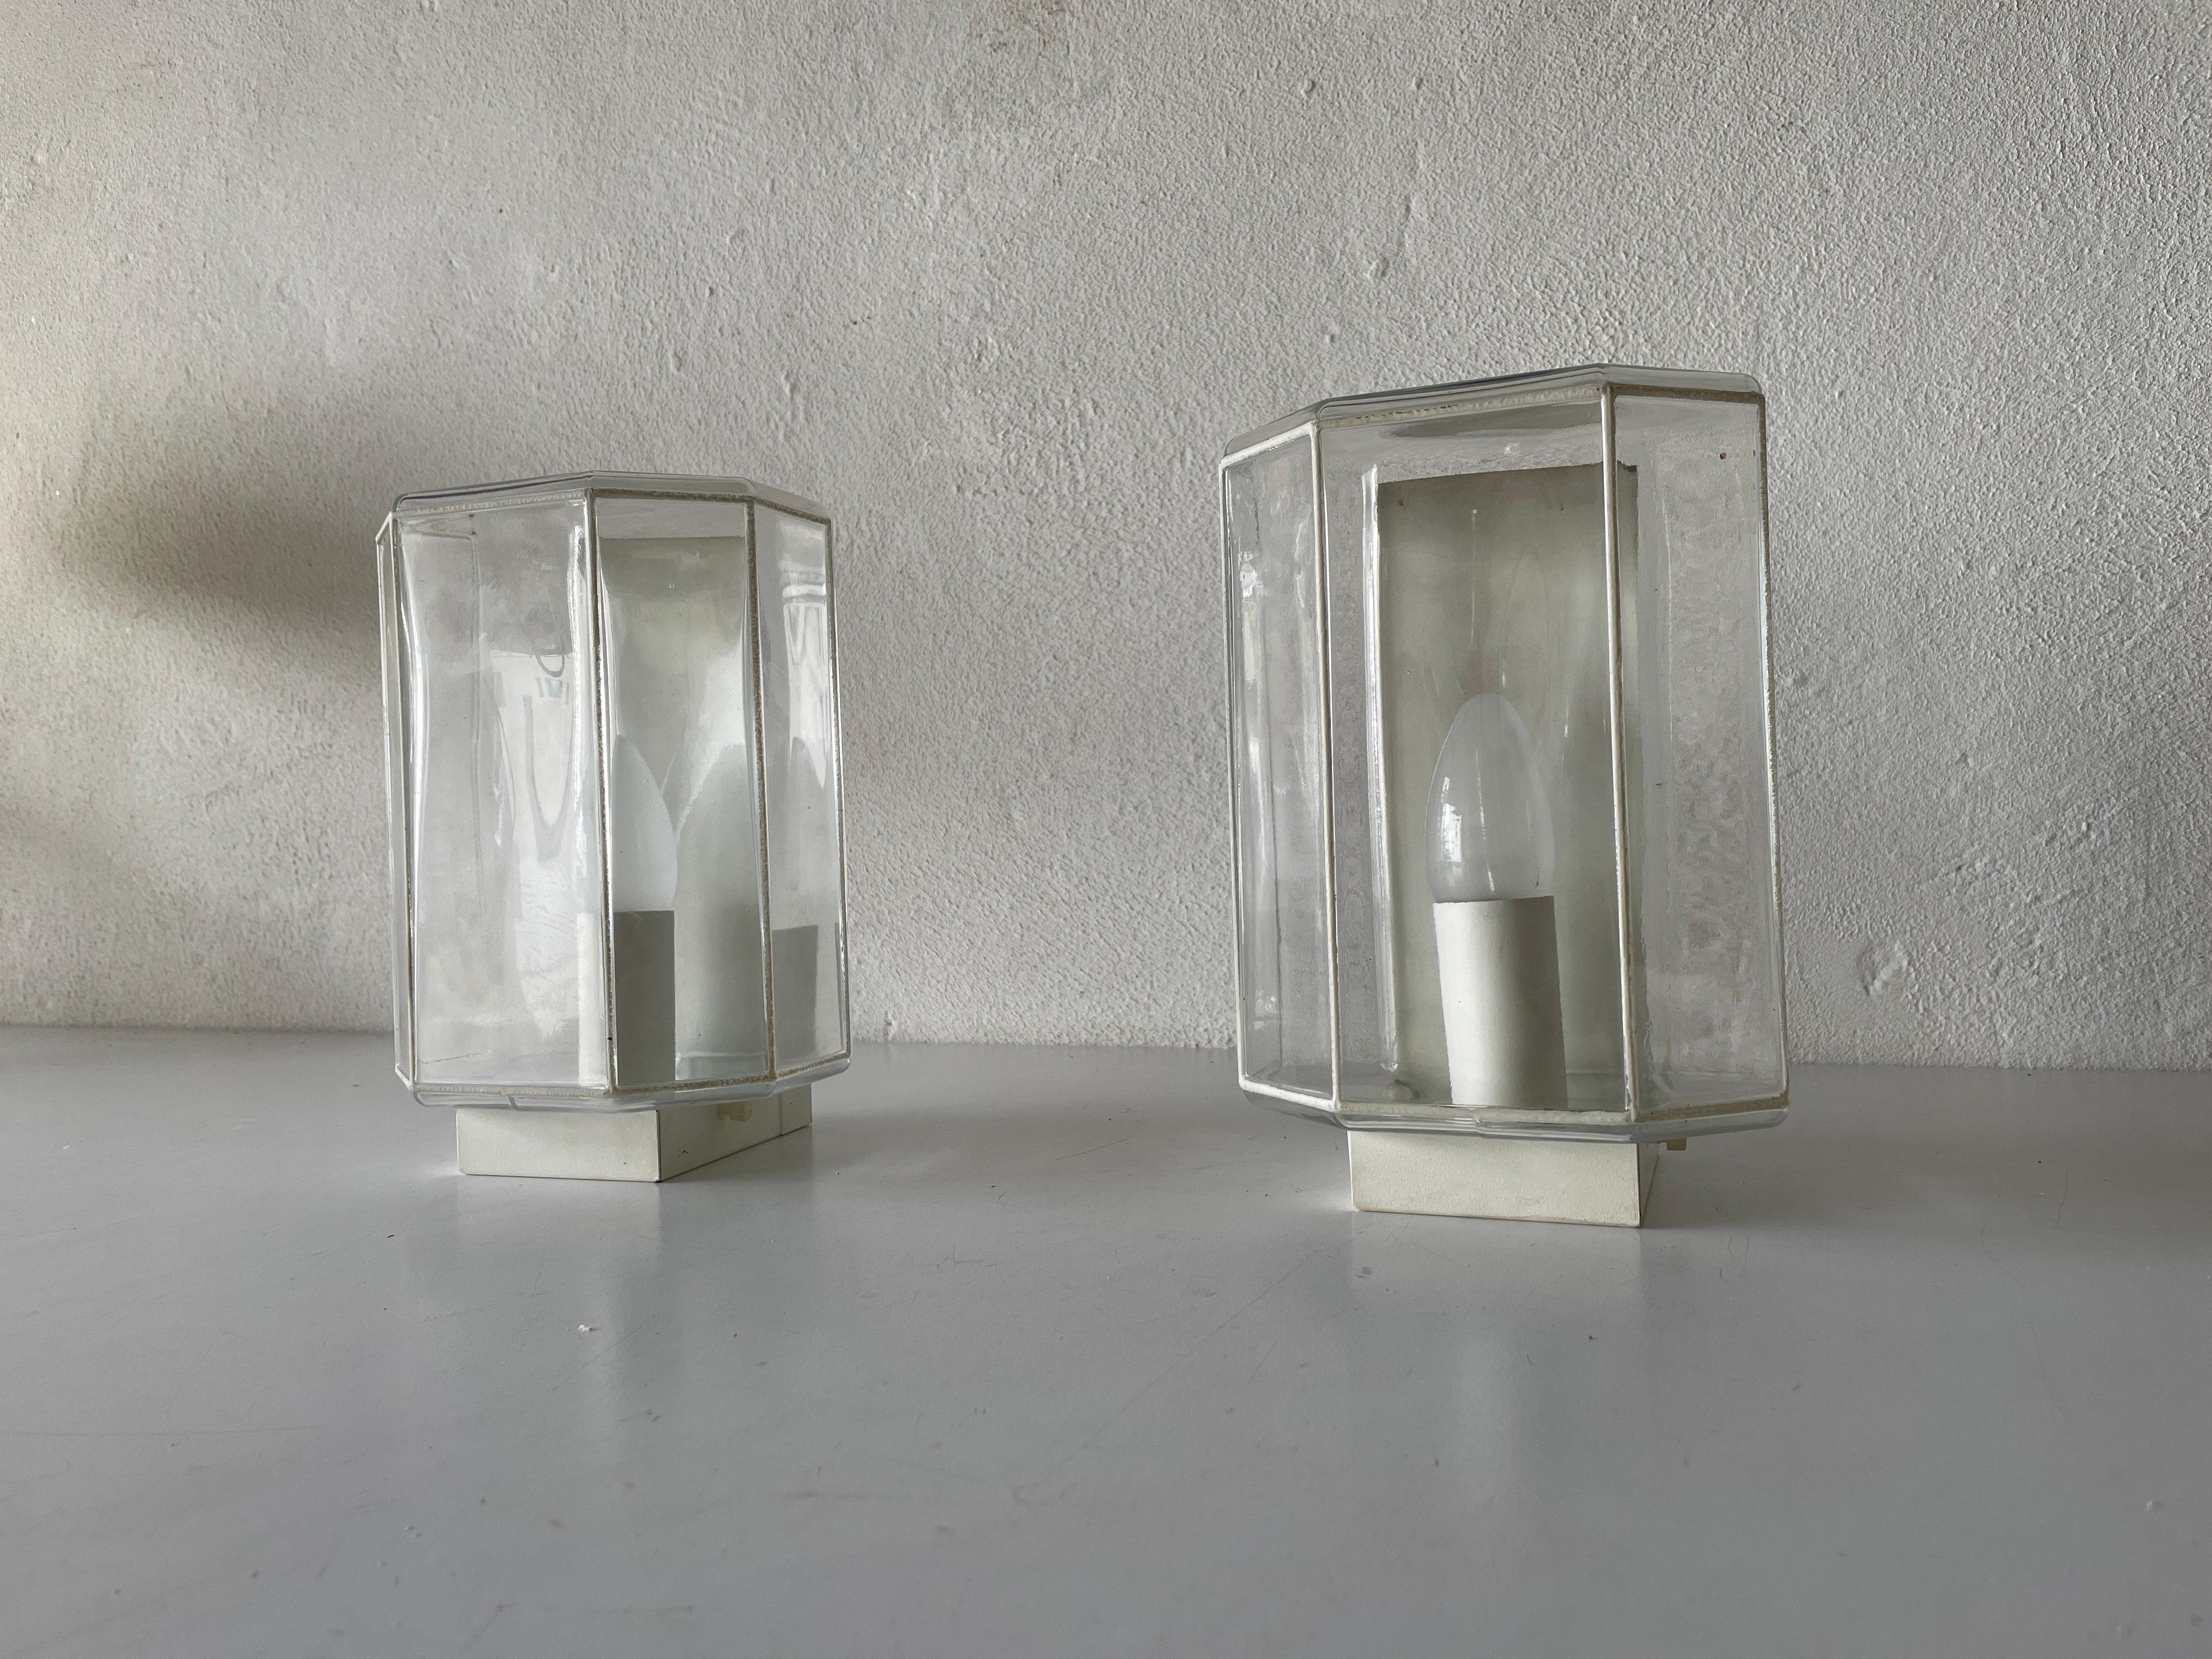 White Iron Structured Glass Pair of Sconces, 1960s, Limburg, Germany

Very elegant and minimal design wall lamps
Lamp is in very good condition.

These lamps works with E14 standard light bulbs. 
Wired and suitable to use in all countries.